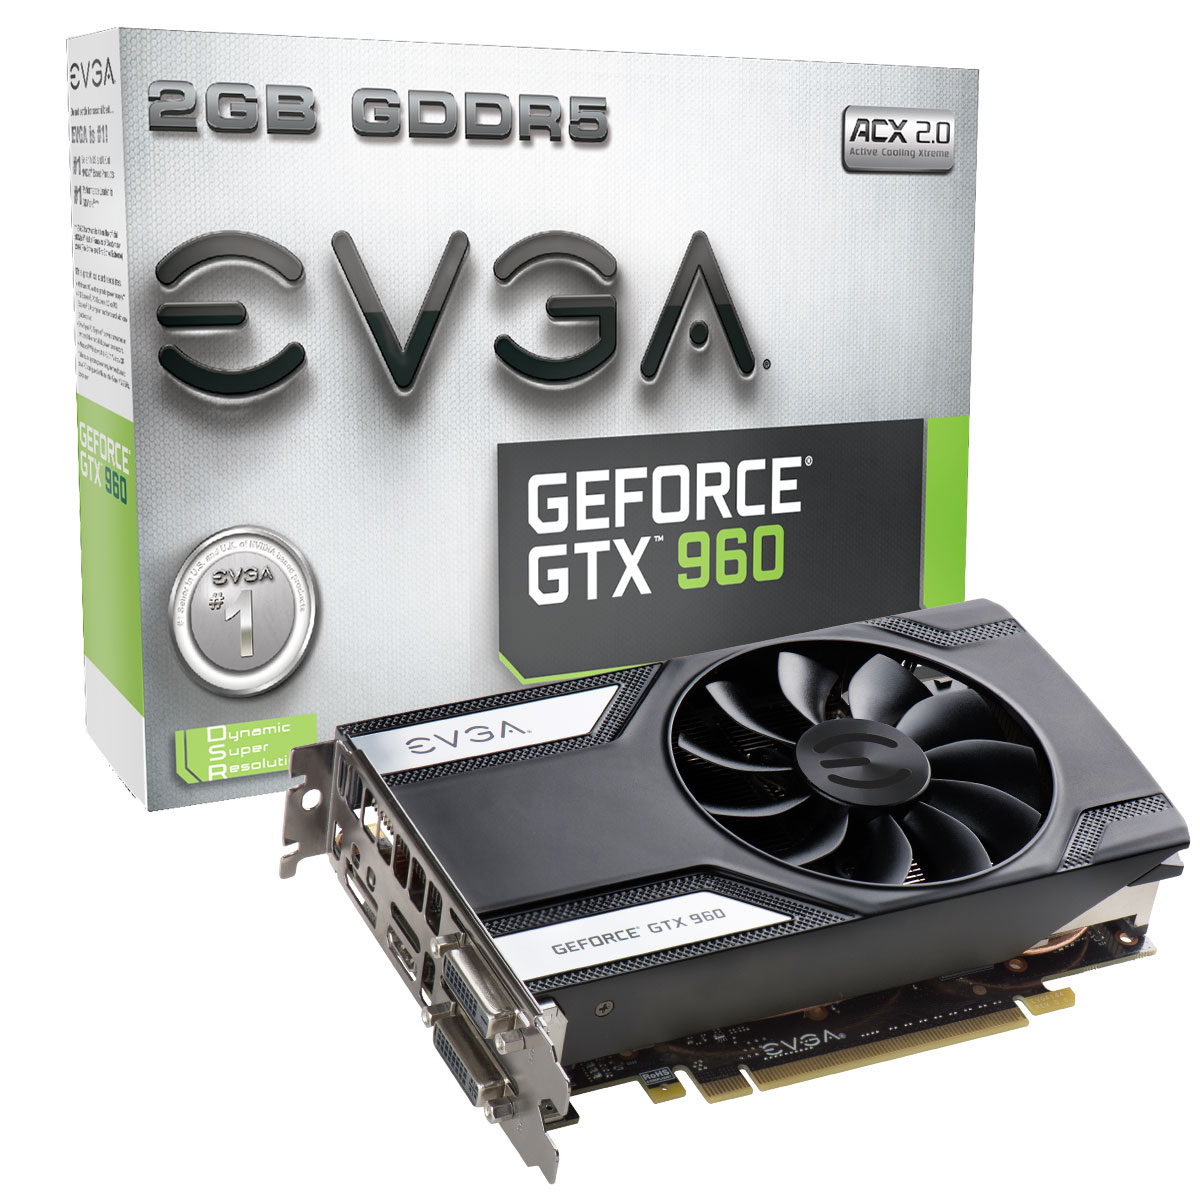 how to update nvidia drivers geforce gtx 960